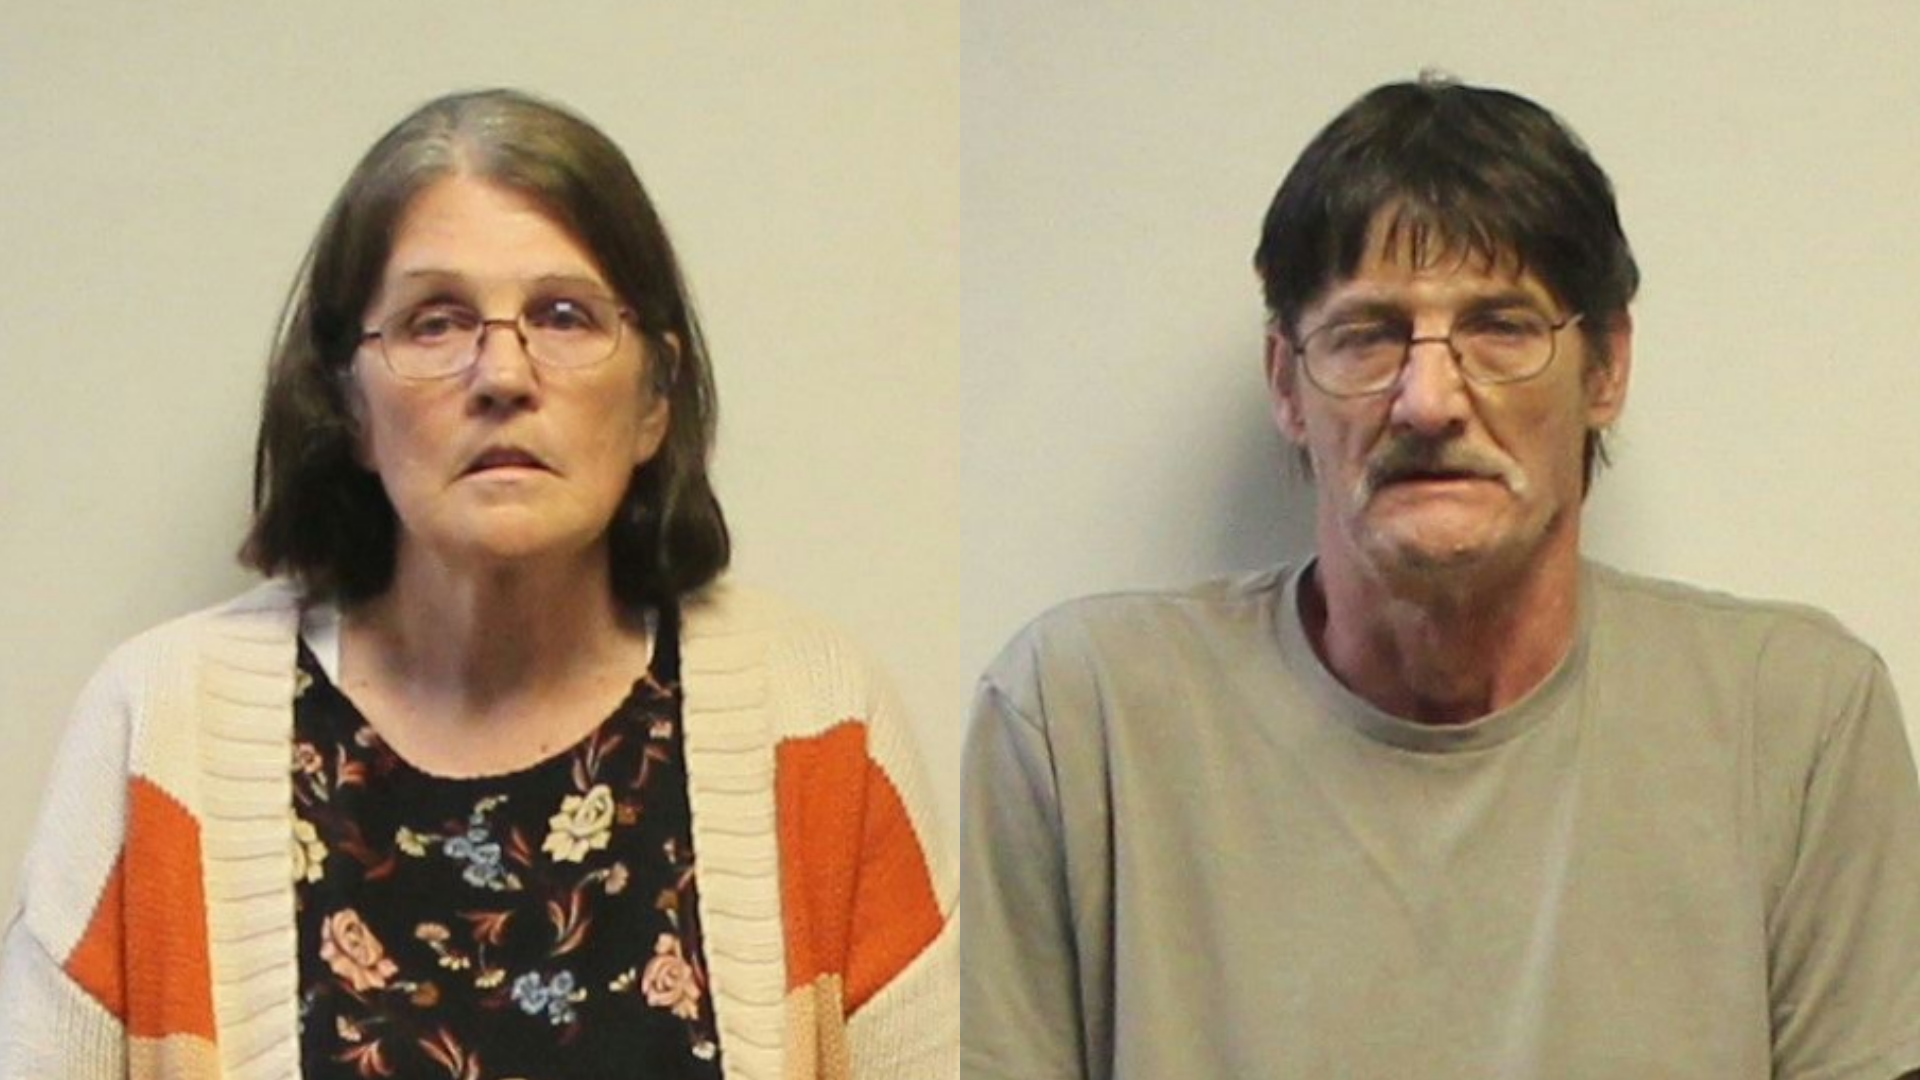 Couple charged for gunshot death under new safe storage laws, Newaygo Co. prosecutor says